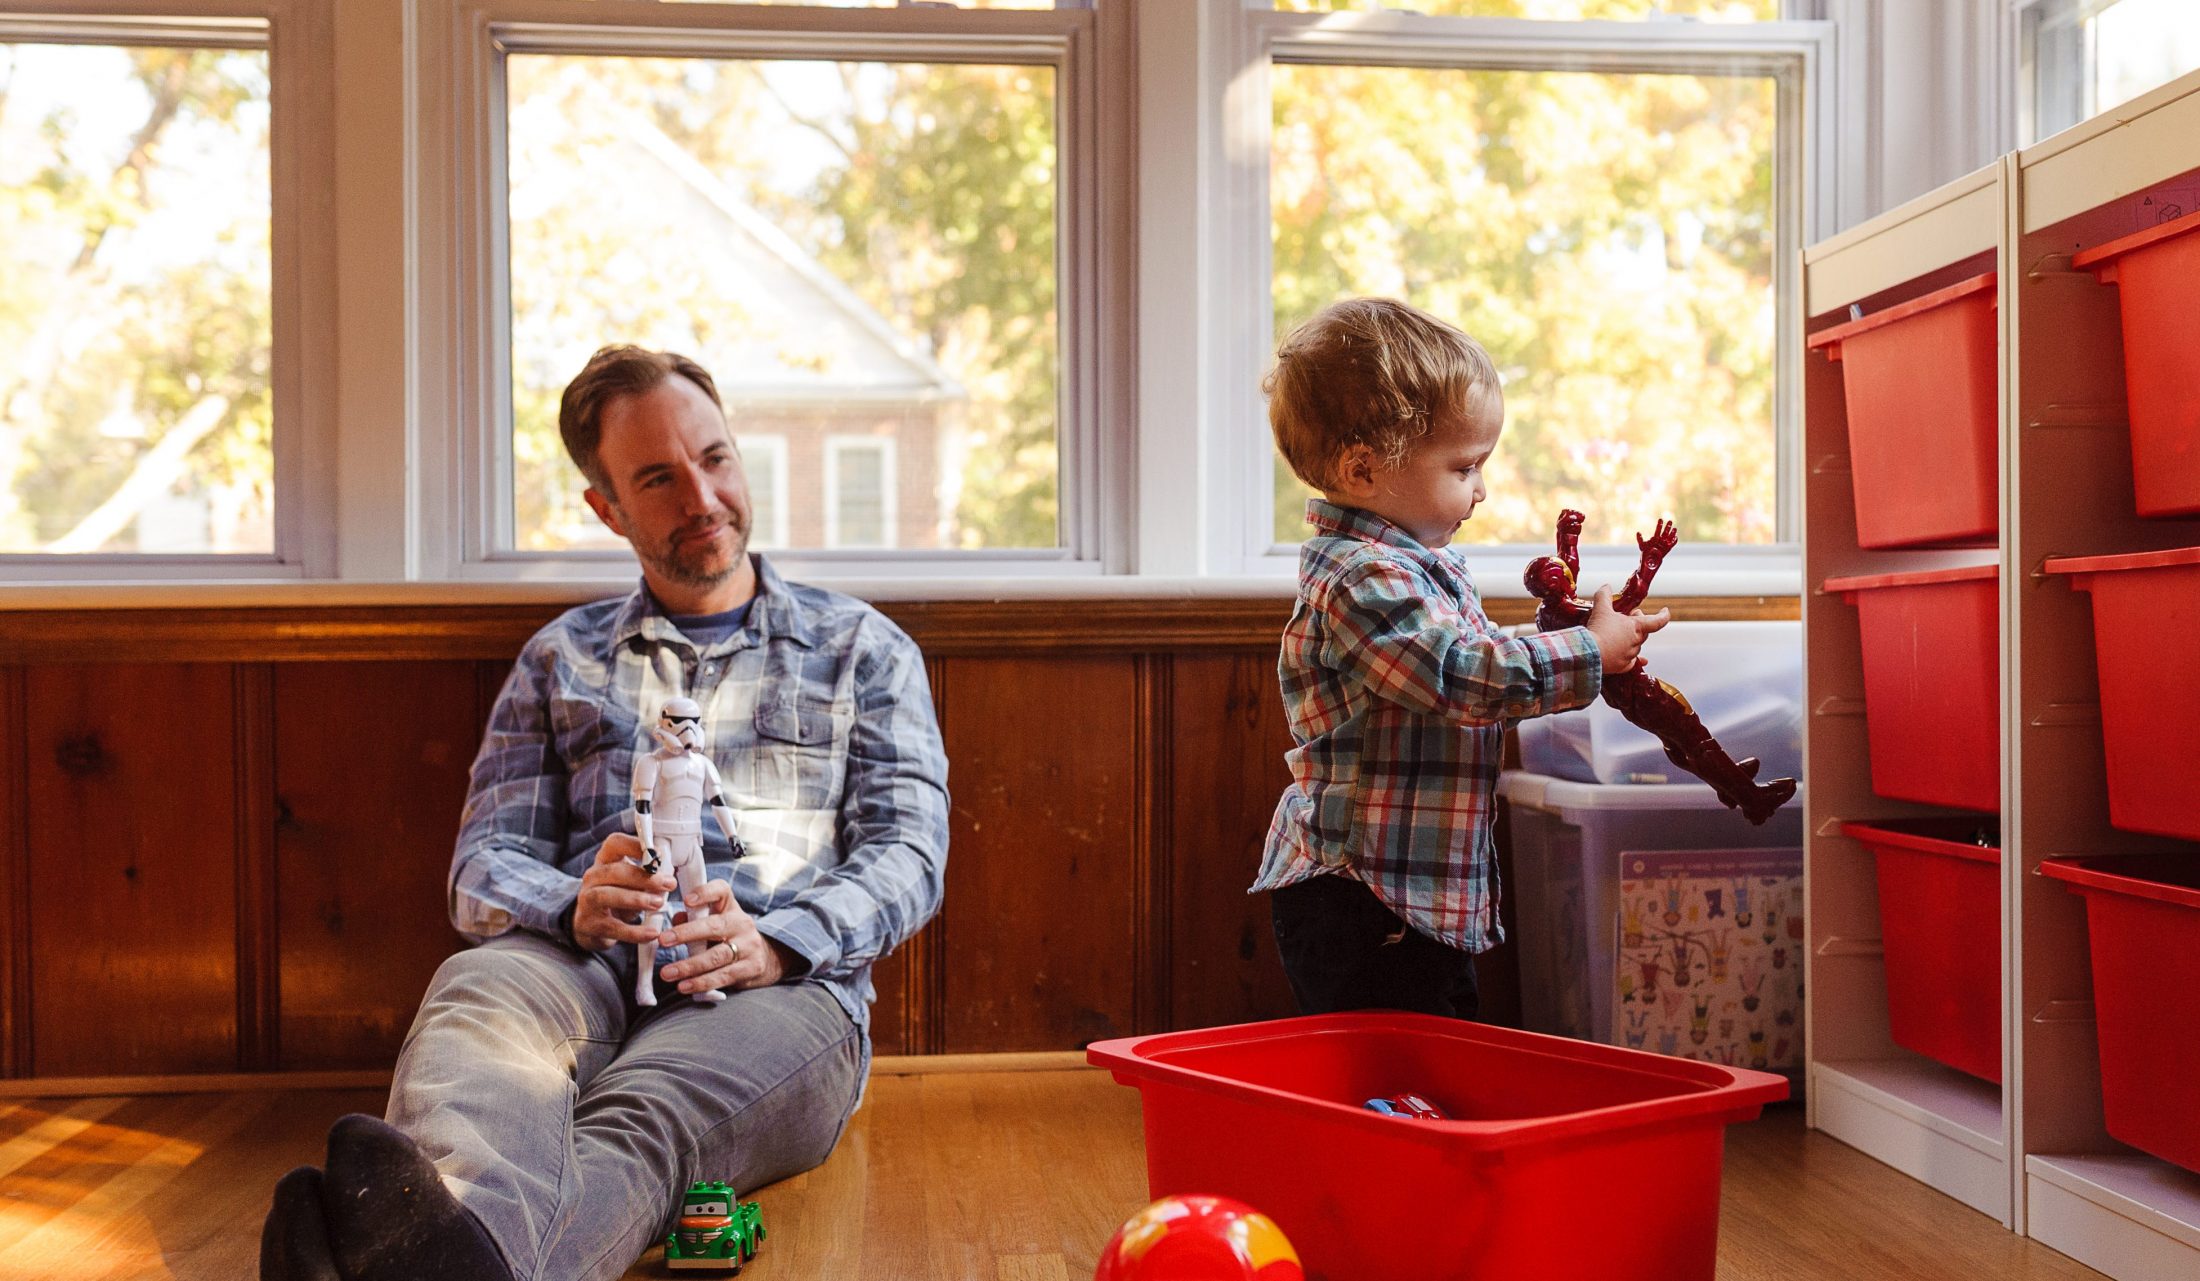 DC widow blog writer Marjorie Brimley's husband Shawn plays with his youngest son in playroom